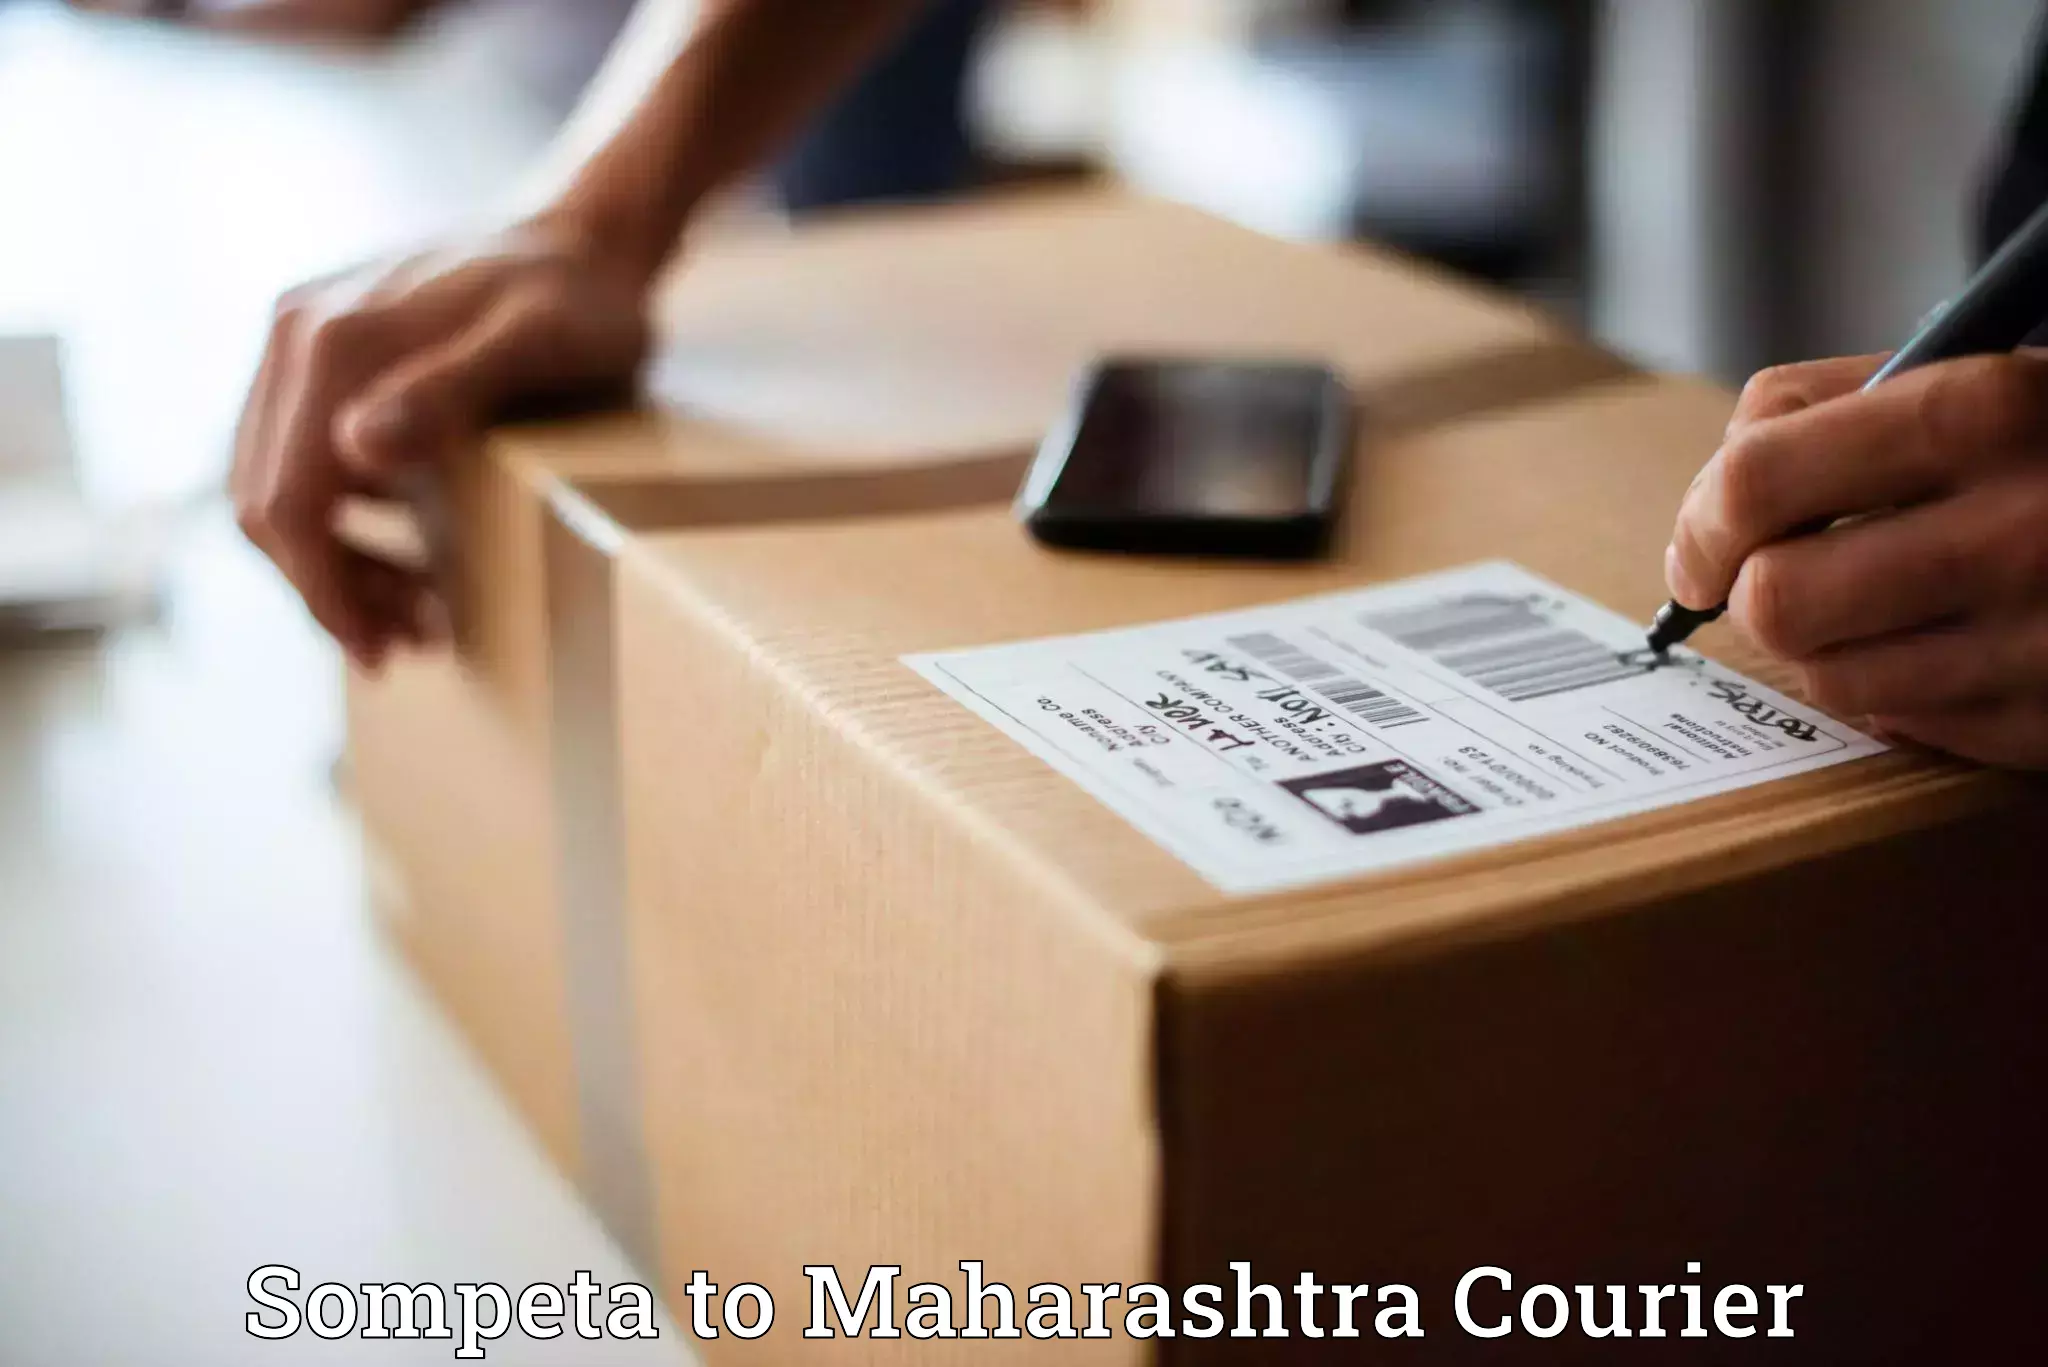 Multi-service courier options Sompeta to Dharmabad